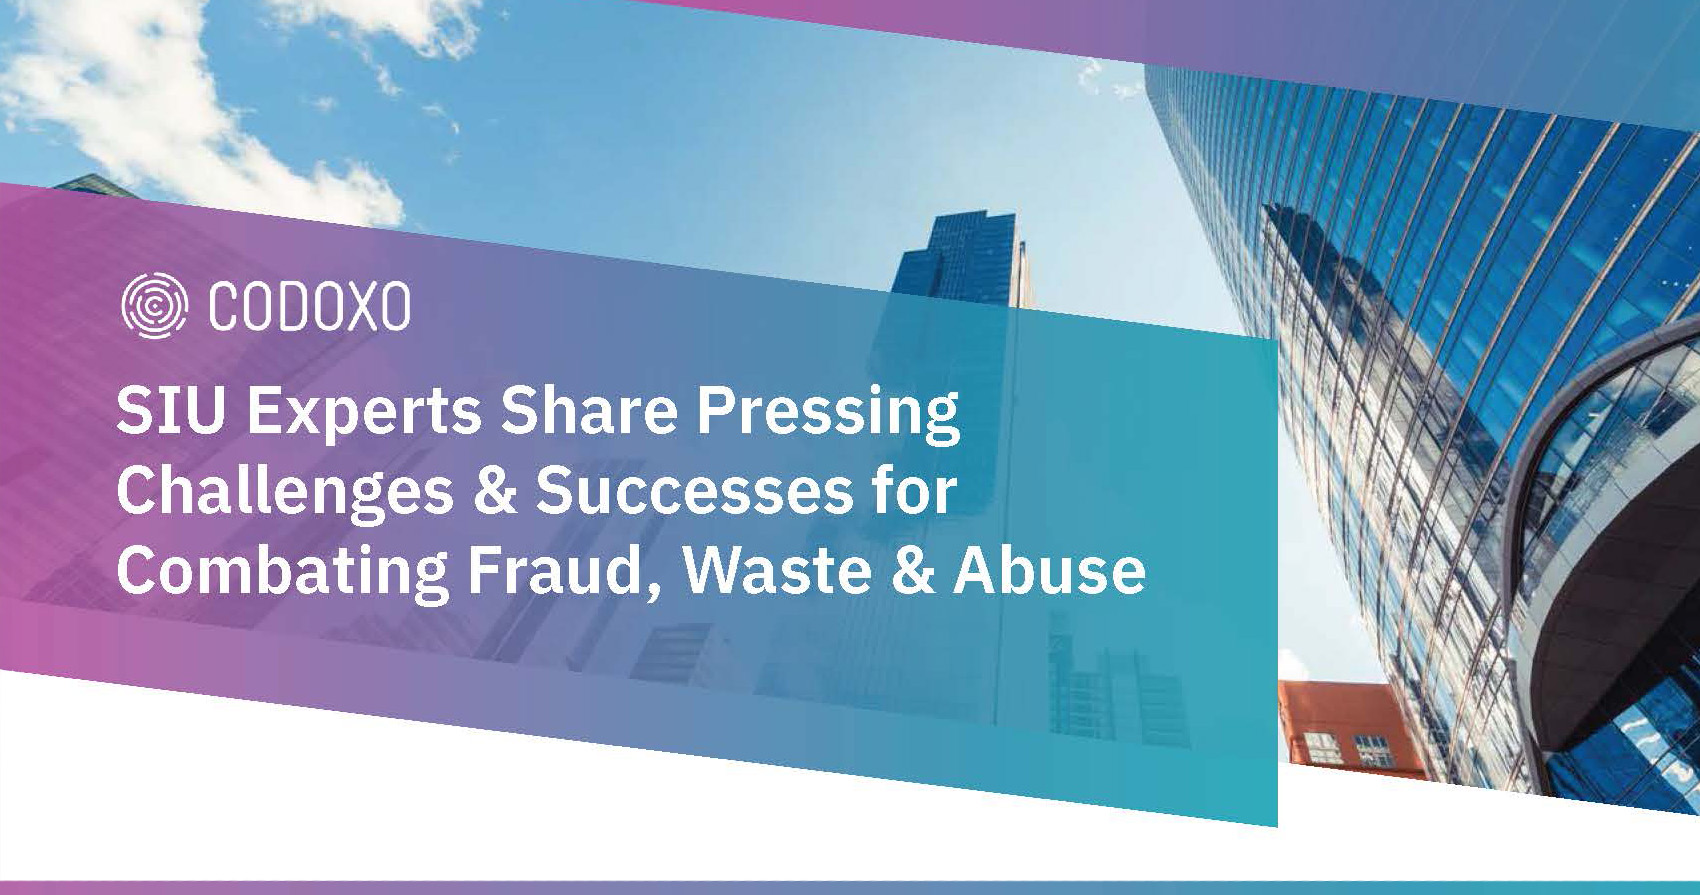 Infographic- SIU Experts Share Pressing Challenges & Successes for Combating Fraud, Waste & Abuse